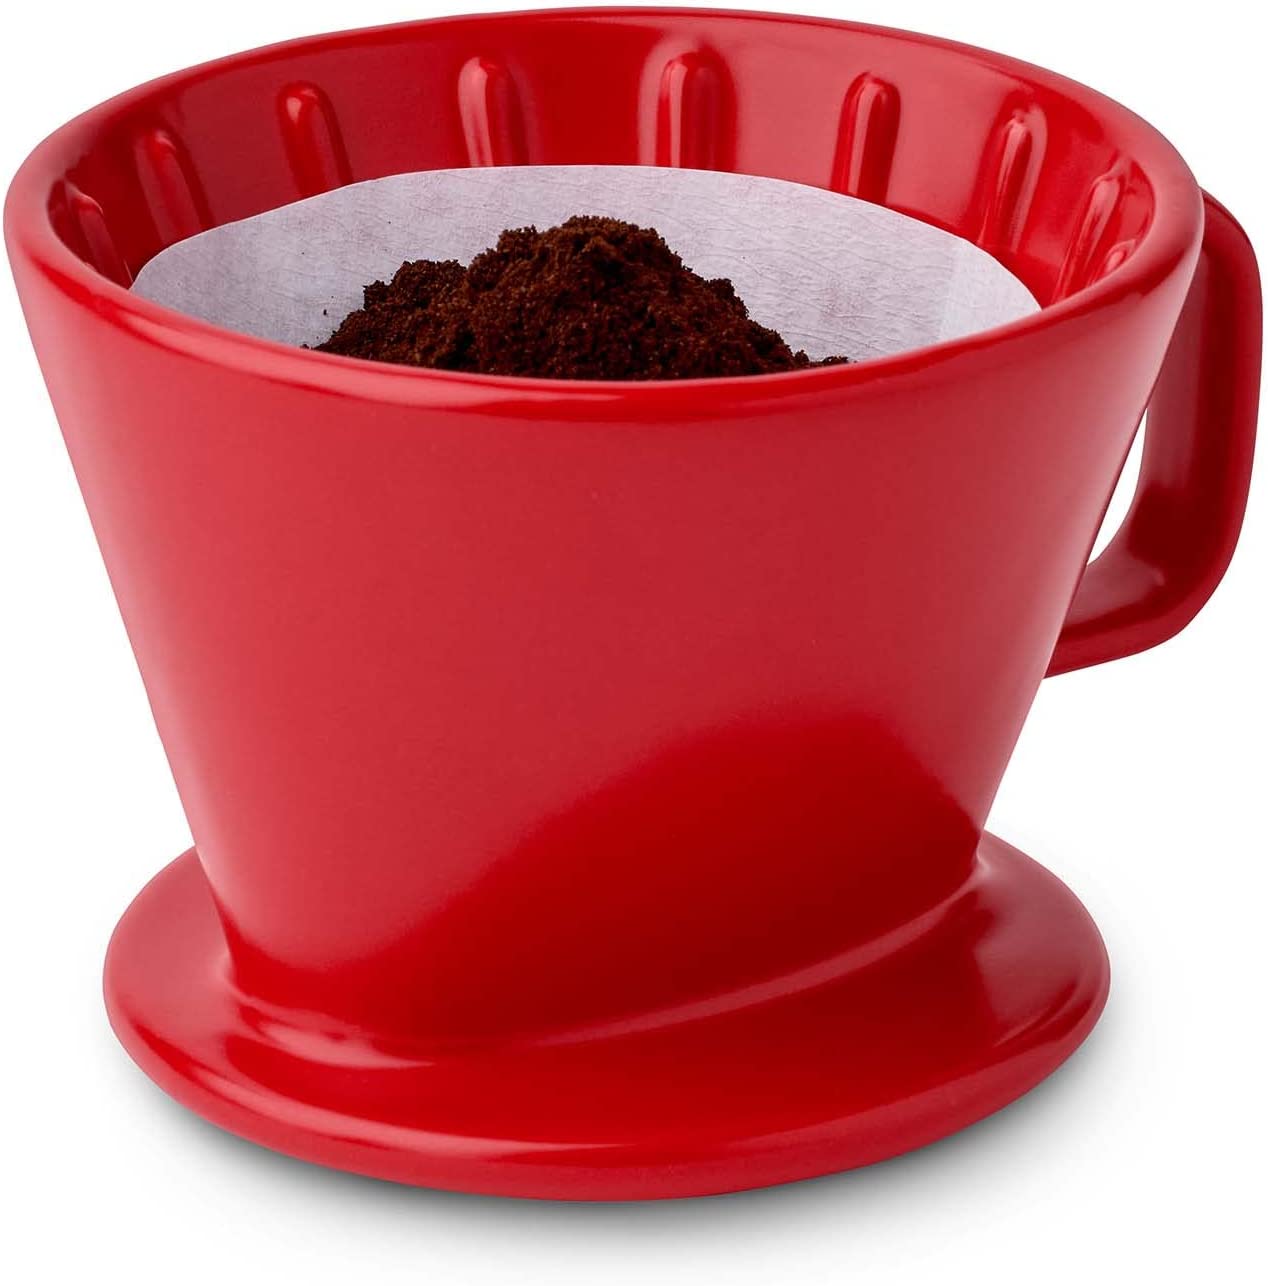 Tchibo Coffee Filter, Hand Filter, Hand Infusion, Filter Size 2, Dishwasher Safe, Ceramic, Red